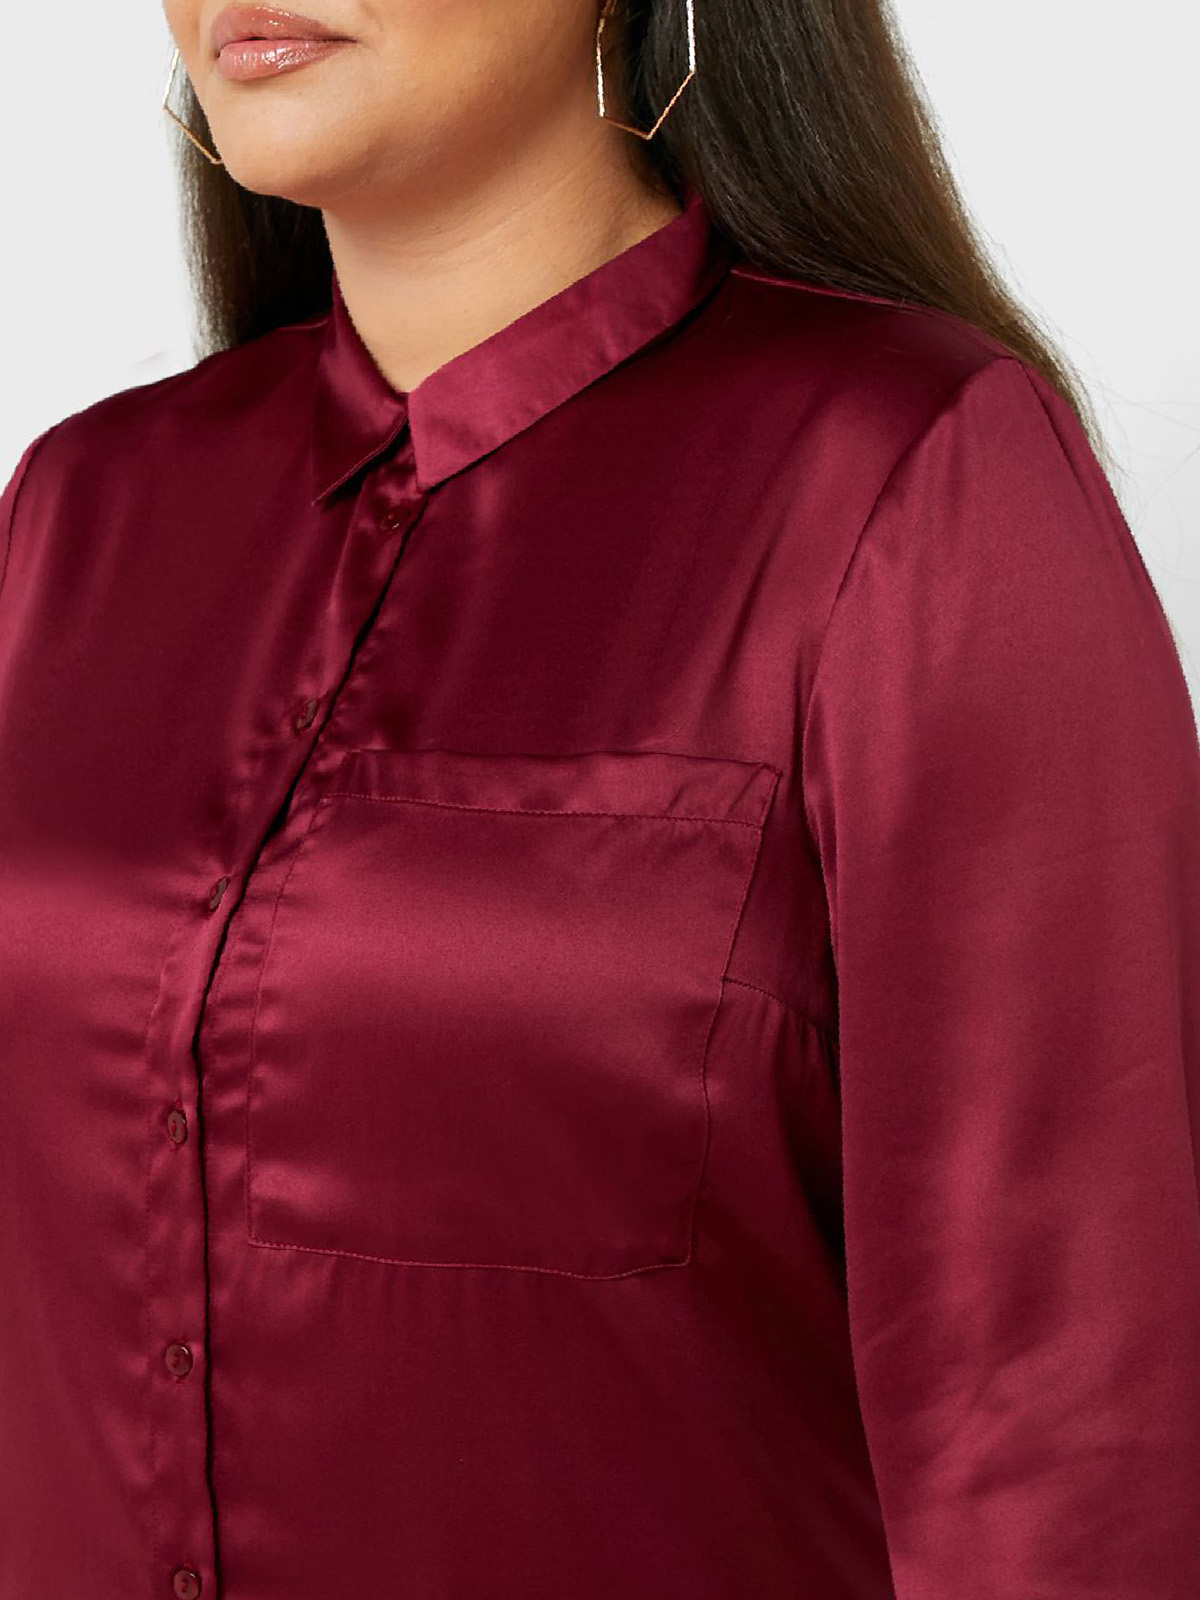 Capsule - - RED Long Sleeve Satin Shirt - Plus Size 20 to 24